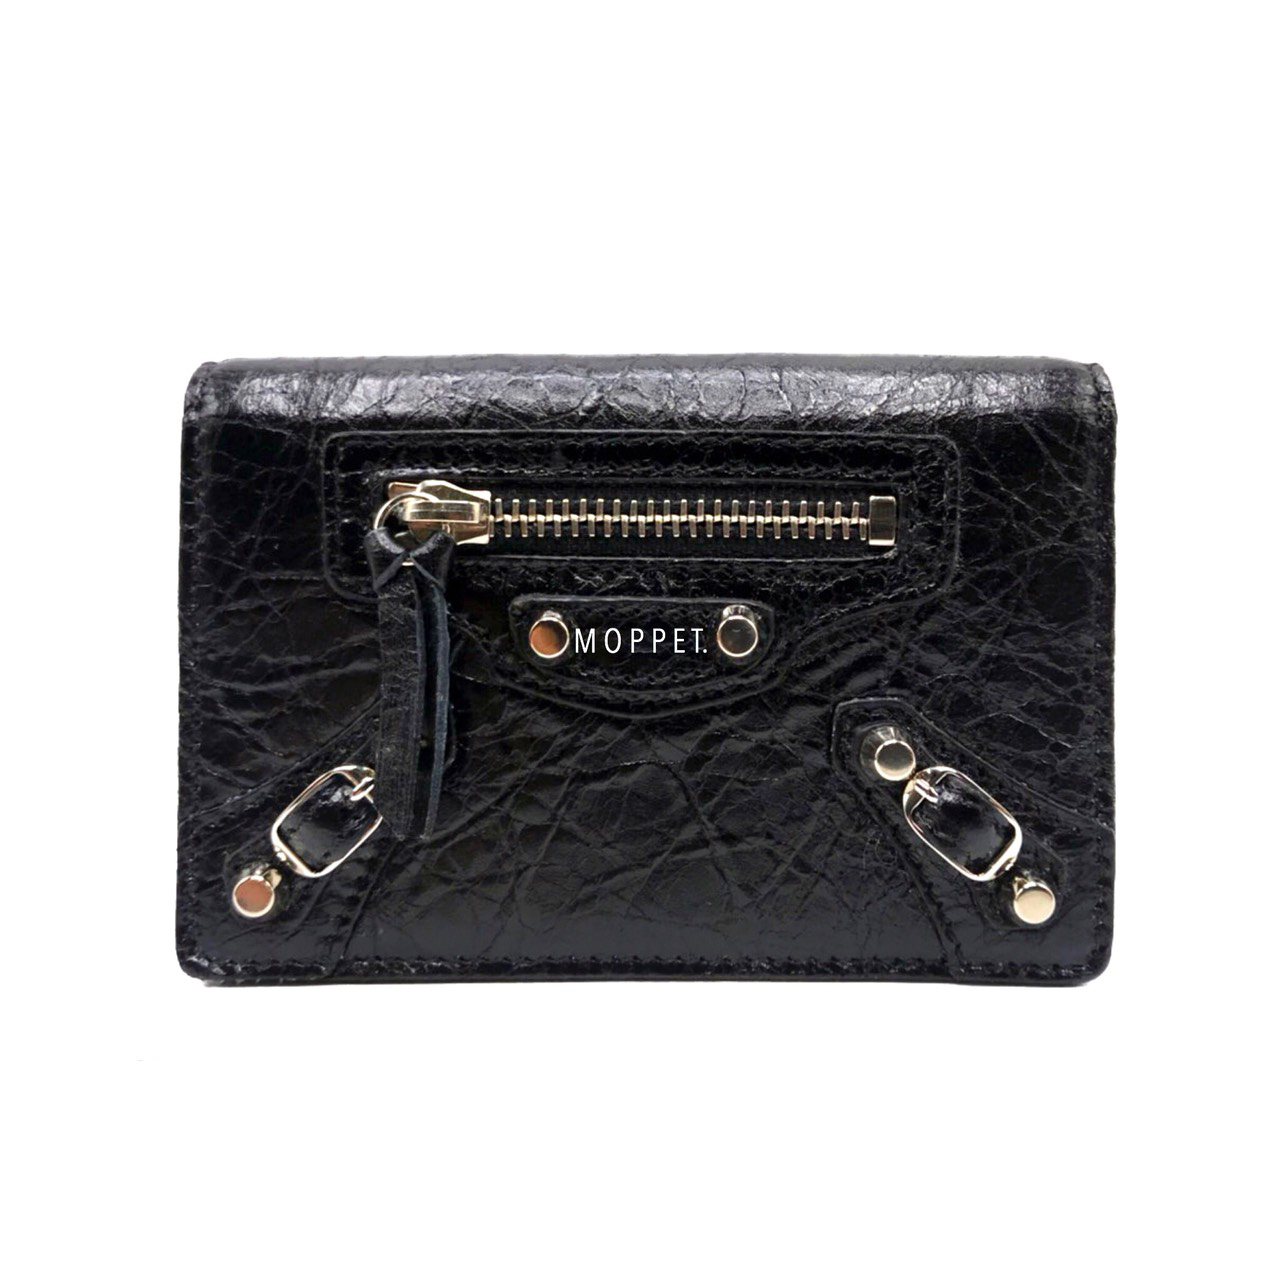 New Balenciaga Card Holder in Black Leather SHW - Moppetbrandname